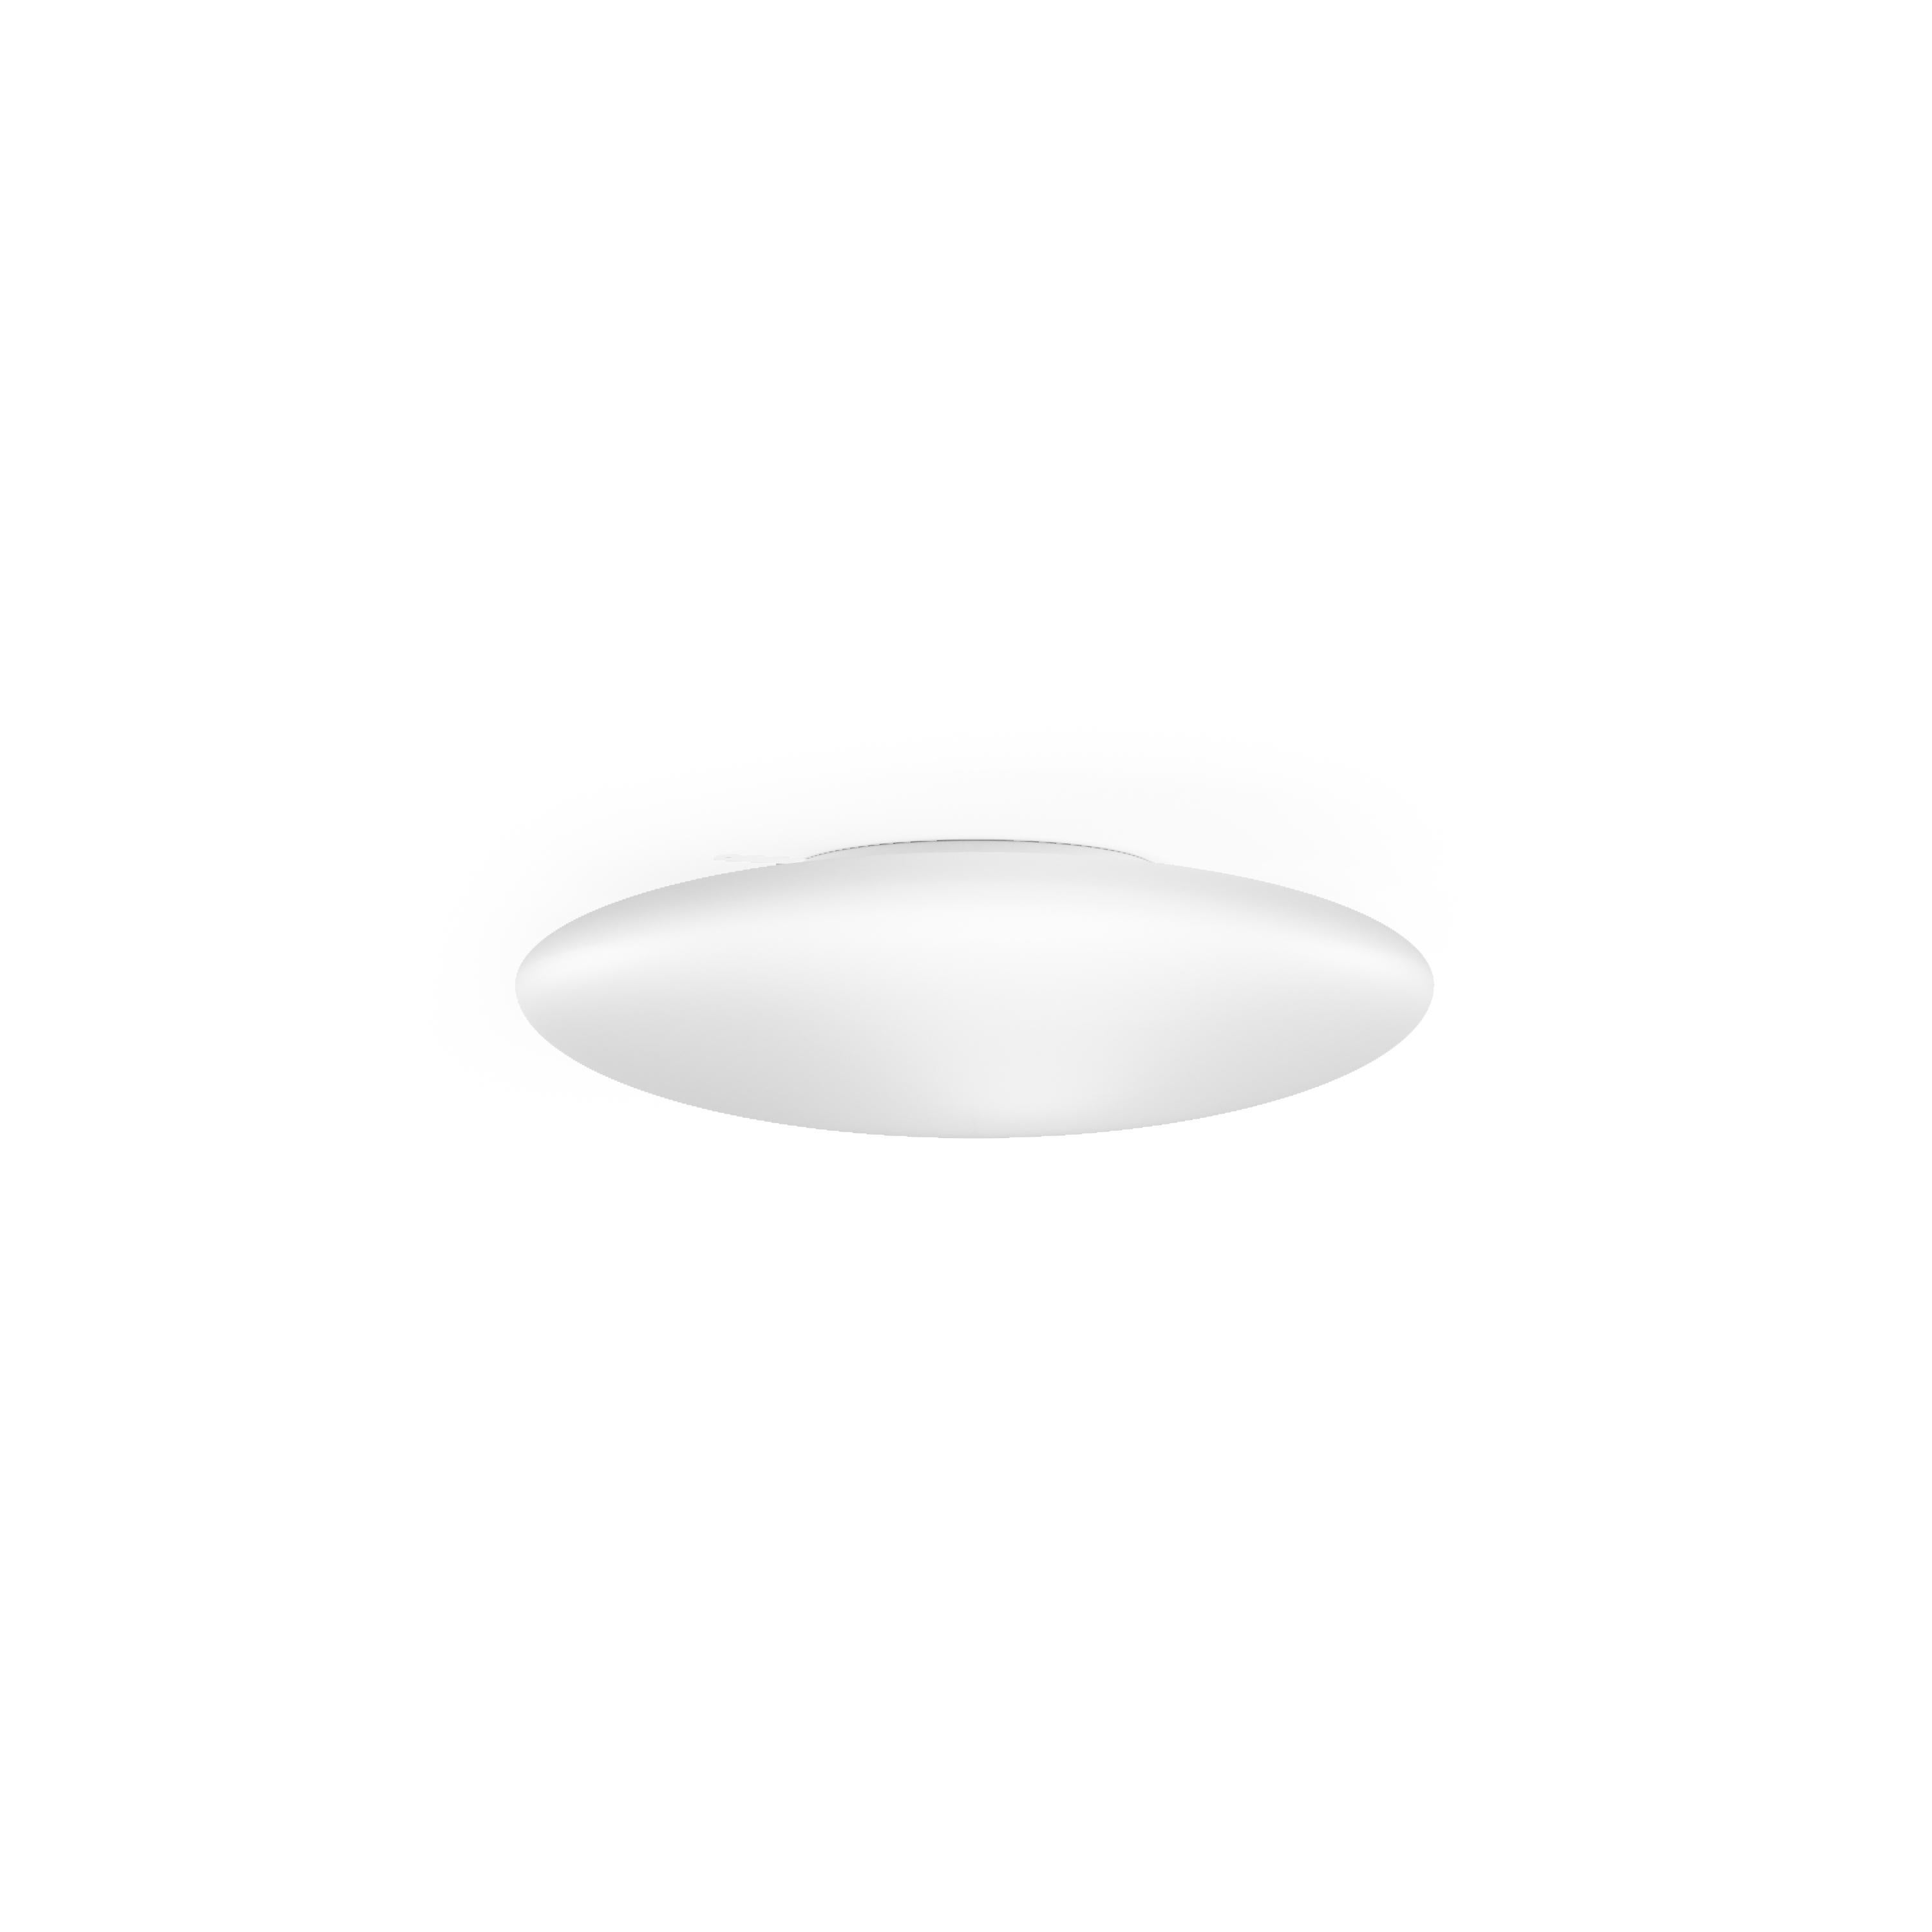 Italian Vistosi Saba Flush Mount/Wall Sconce in White Satin Glass And Glossy White Frame For Sale